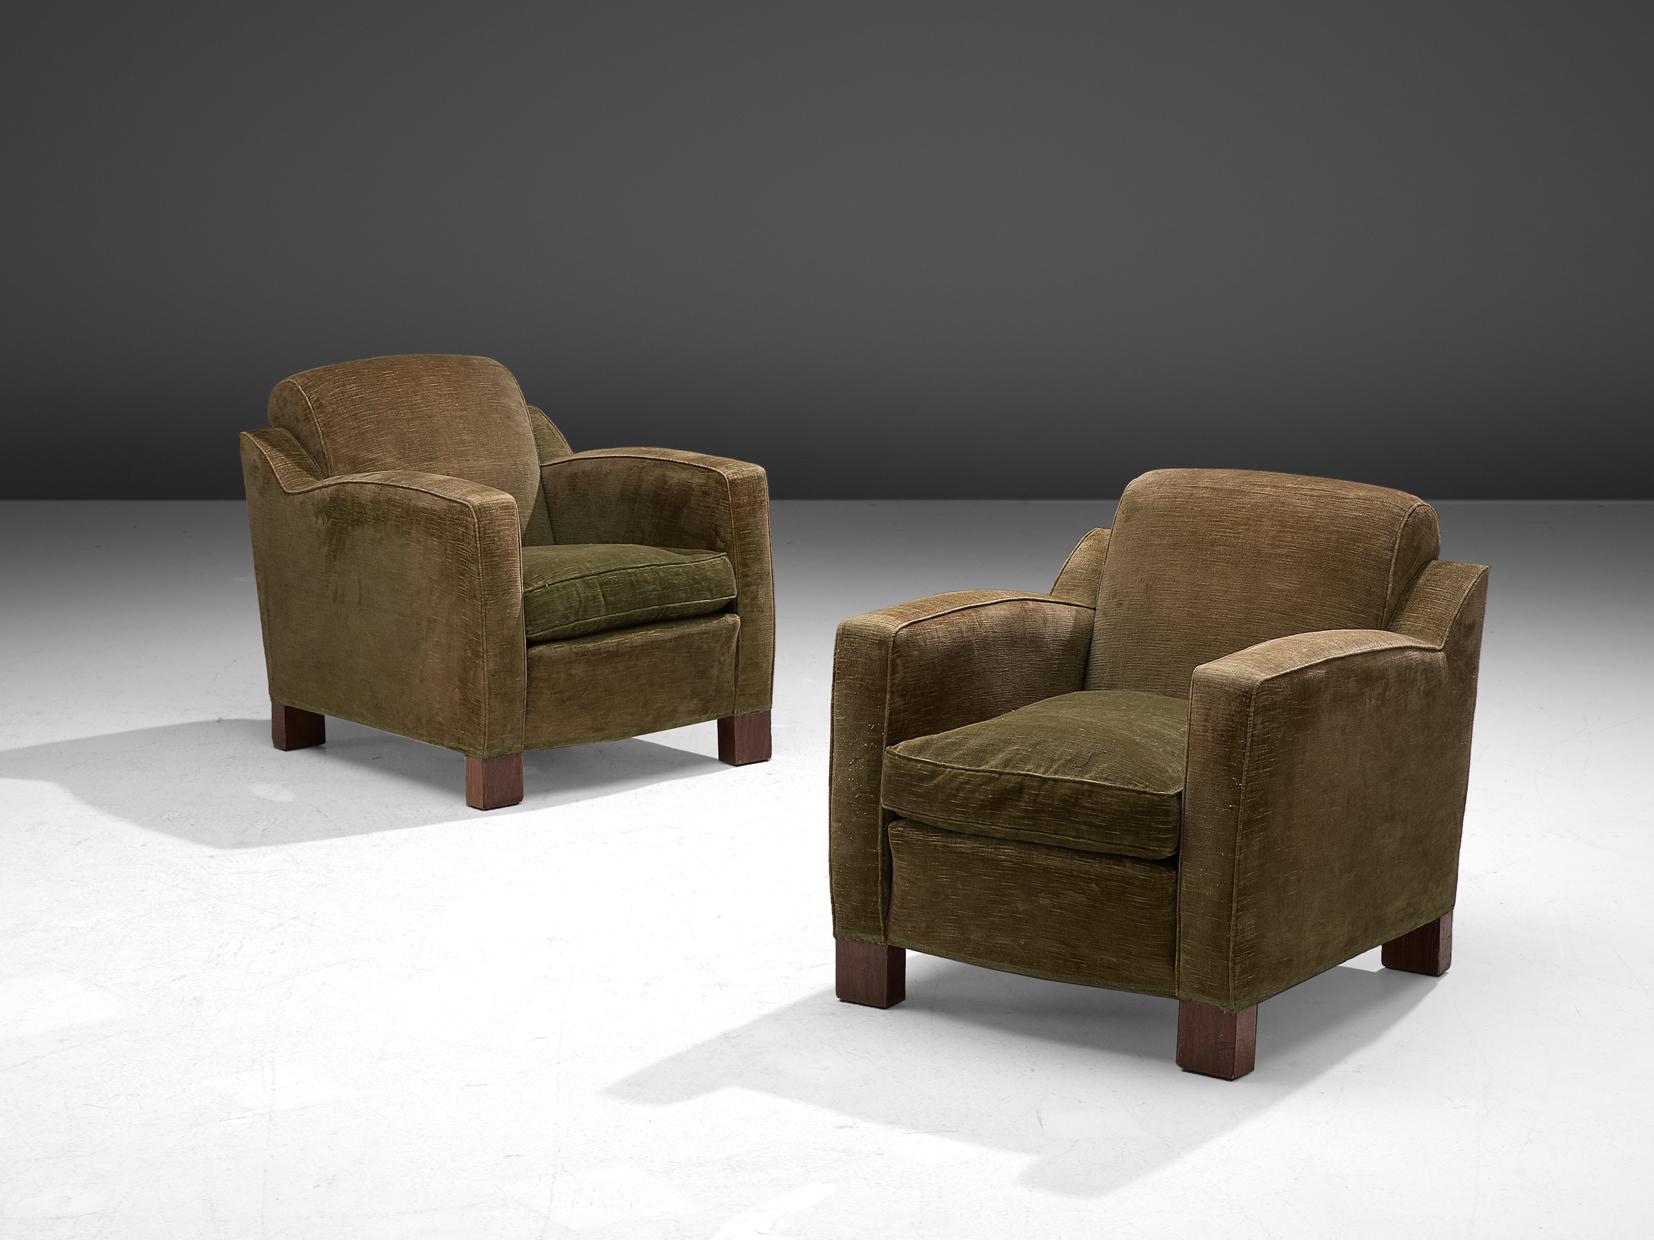 Pair of lounge chairs, green velours and wood, Scandinavia, 1940s

This pair of armchairs features parallelepiped. The set has a curvaceous feel and bulky, chunky aesthetic. The pieces are functional, rational and modest. The seat is finished with